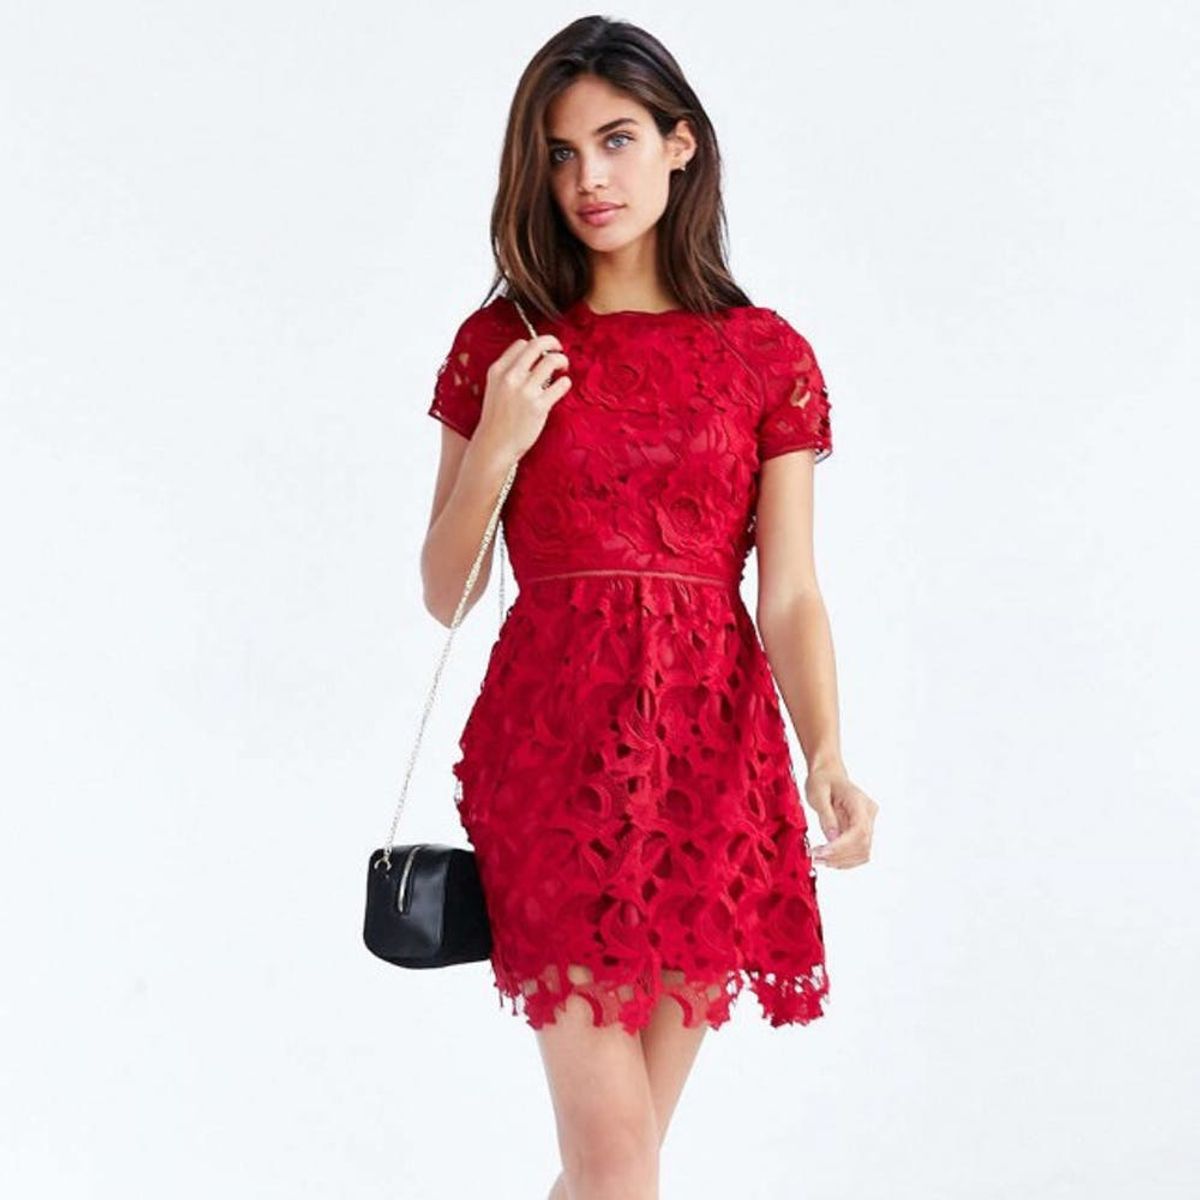 20 Red Dresses for Valentine’s Day That Will Straight Up Slay - Brit + Co